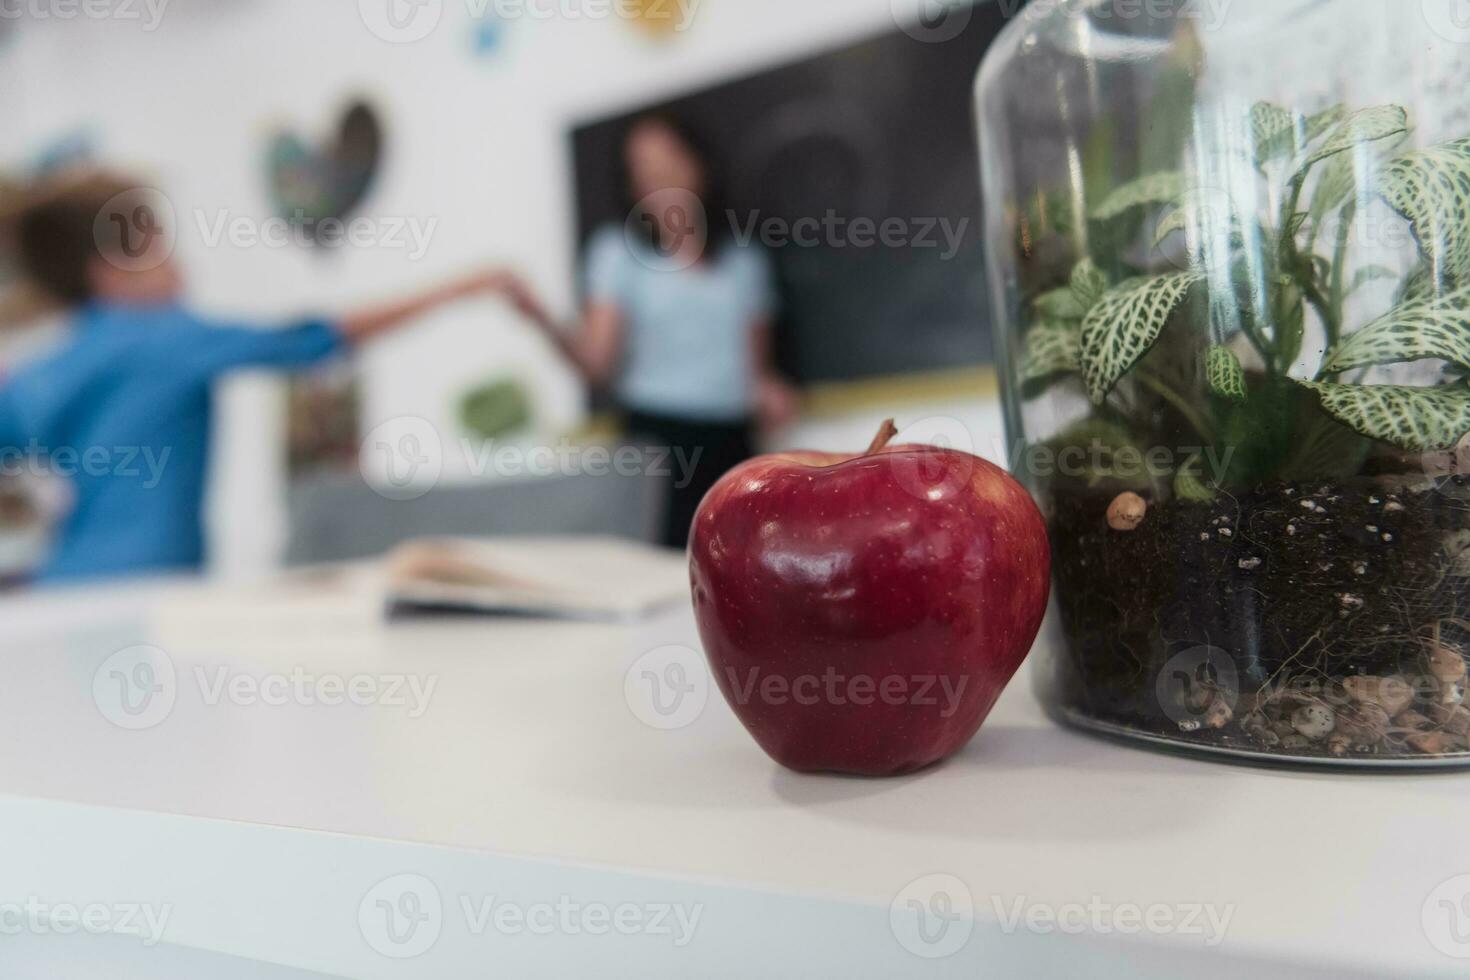 Biology and biochemistry classes. A close-up photo of a bottle containing a green plant and a ripe apple next to the bottle